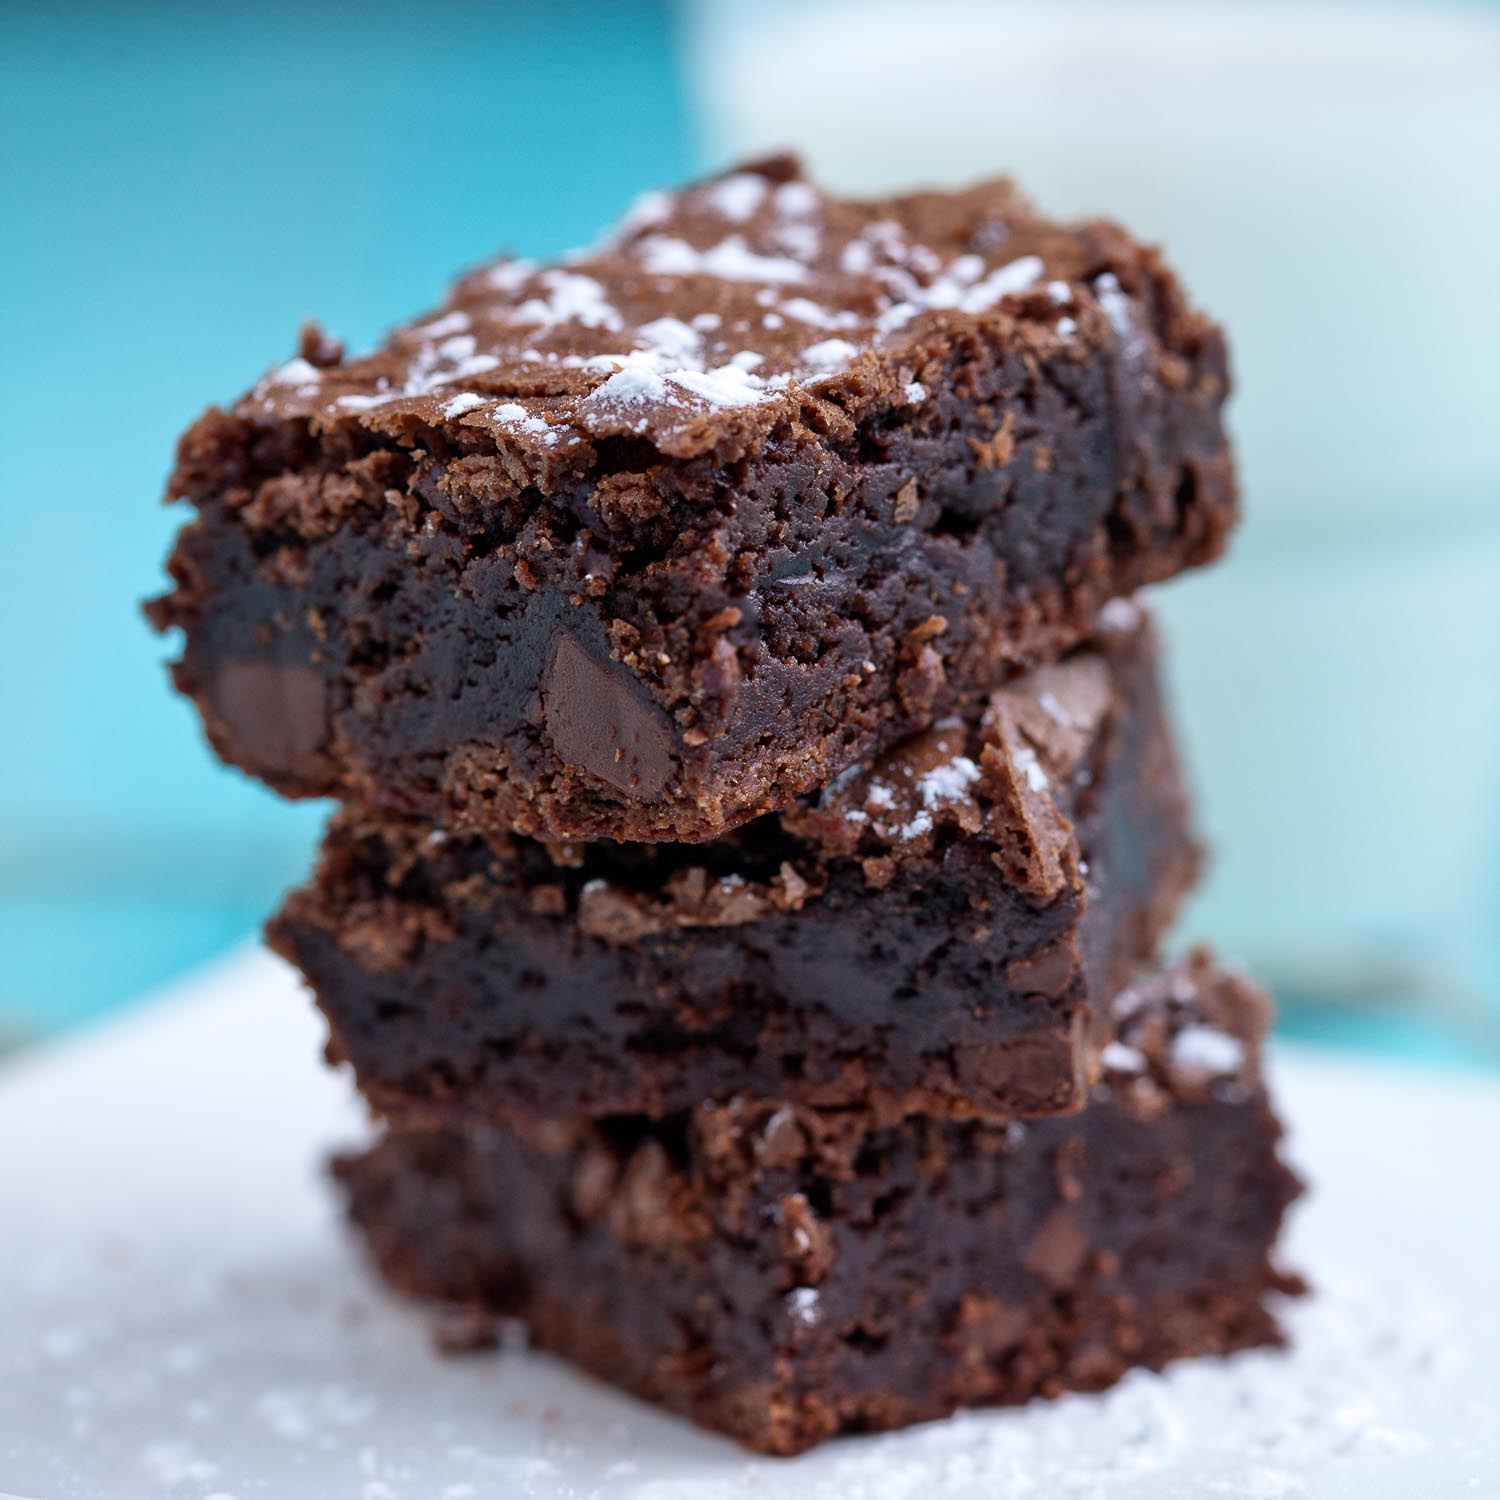 SUPER Fudgy Brownies from a Box Mix - It's Always Autumn